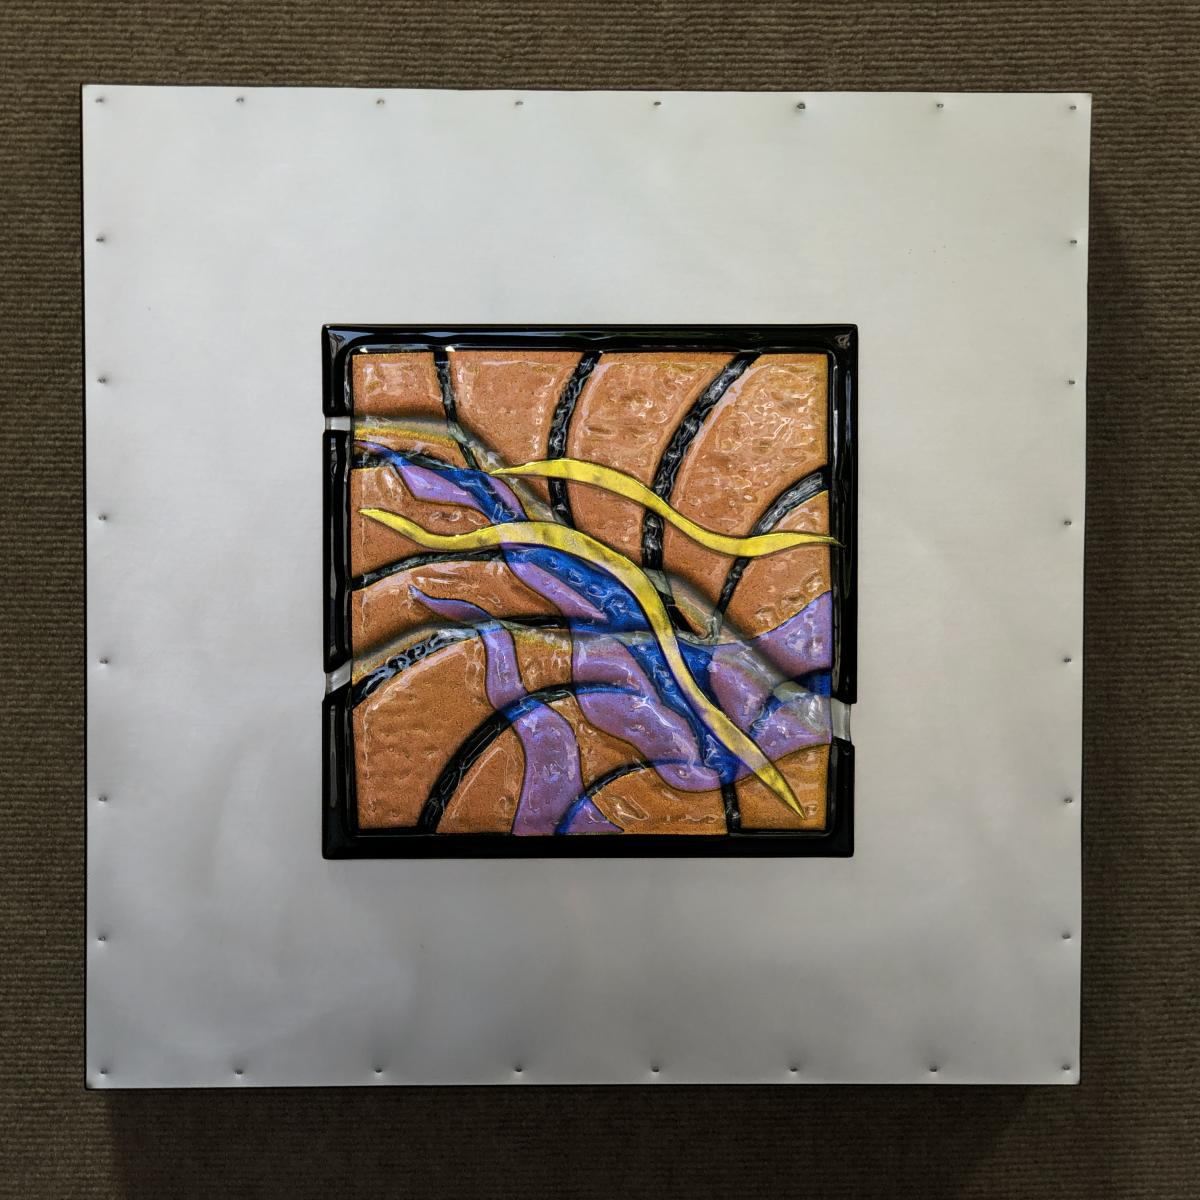 BALI SUNSET
Kiln-fired glass on brushed aluminum
18x18x2
$725 : Available Work : art & architectural glass for residential & commercial installations,purchase & commission